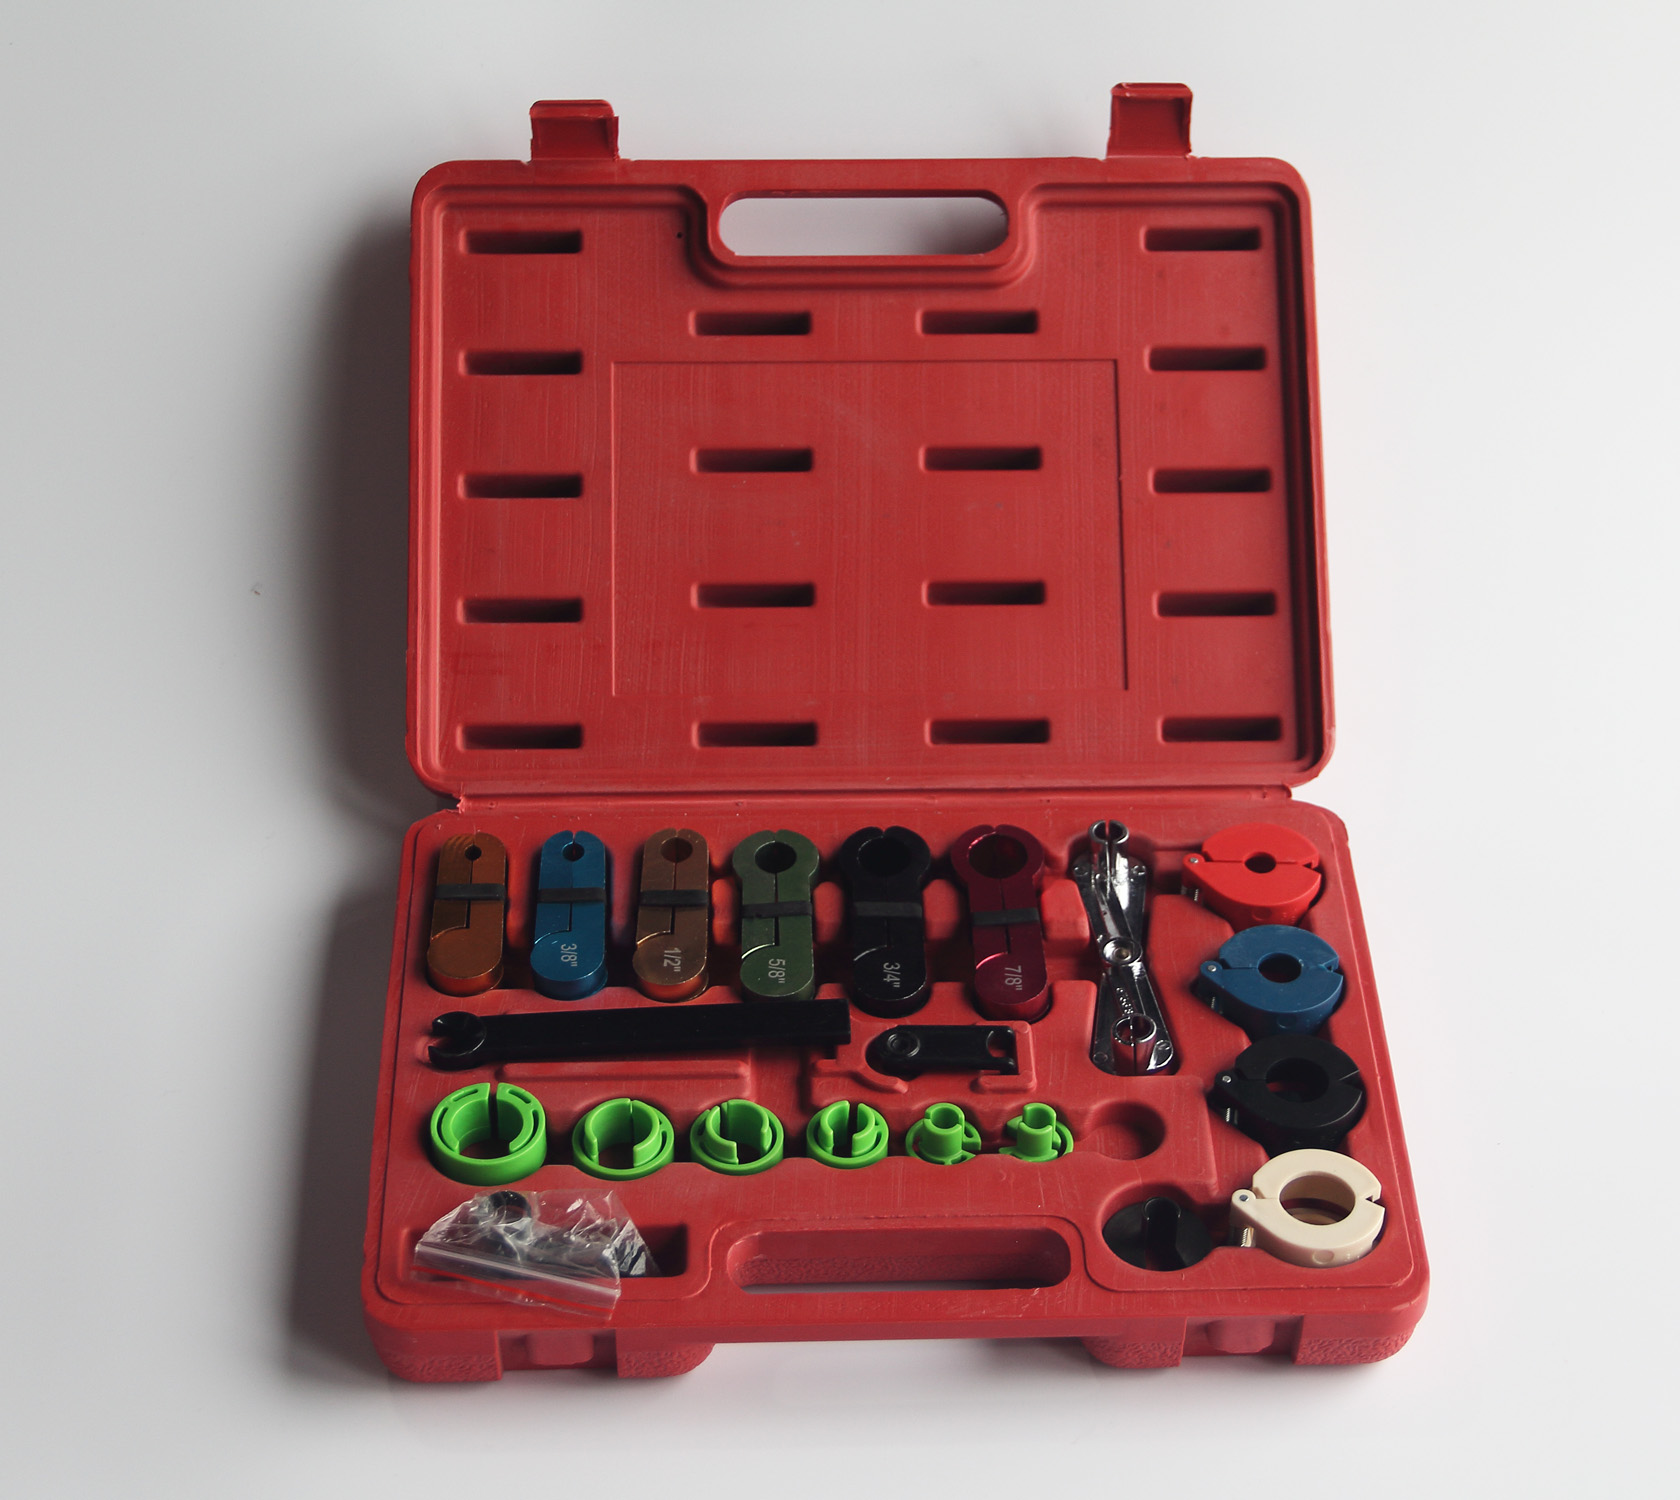 21pcs Fuel & Air Conditioning Disconnection Tool Set